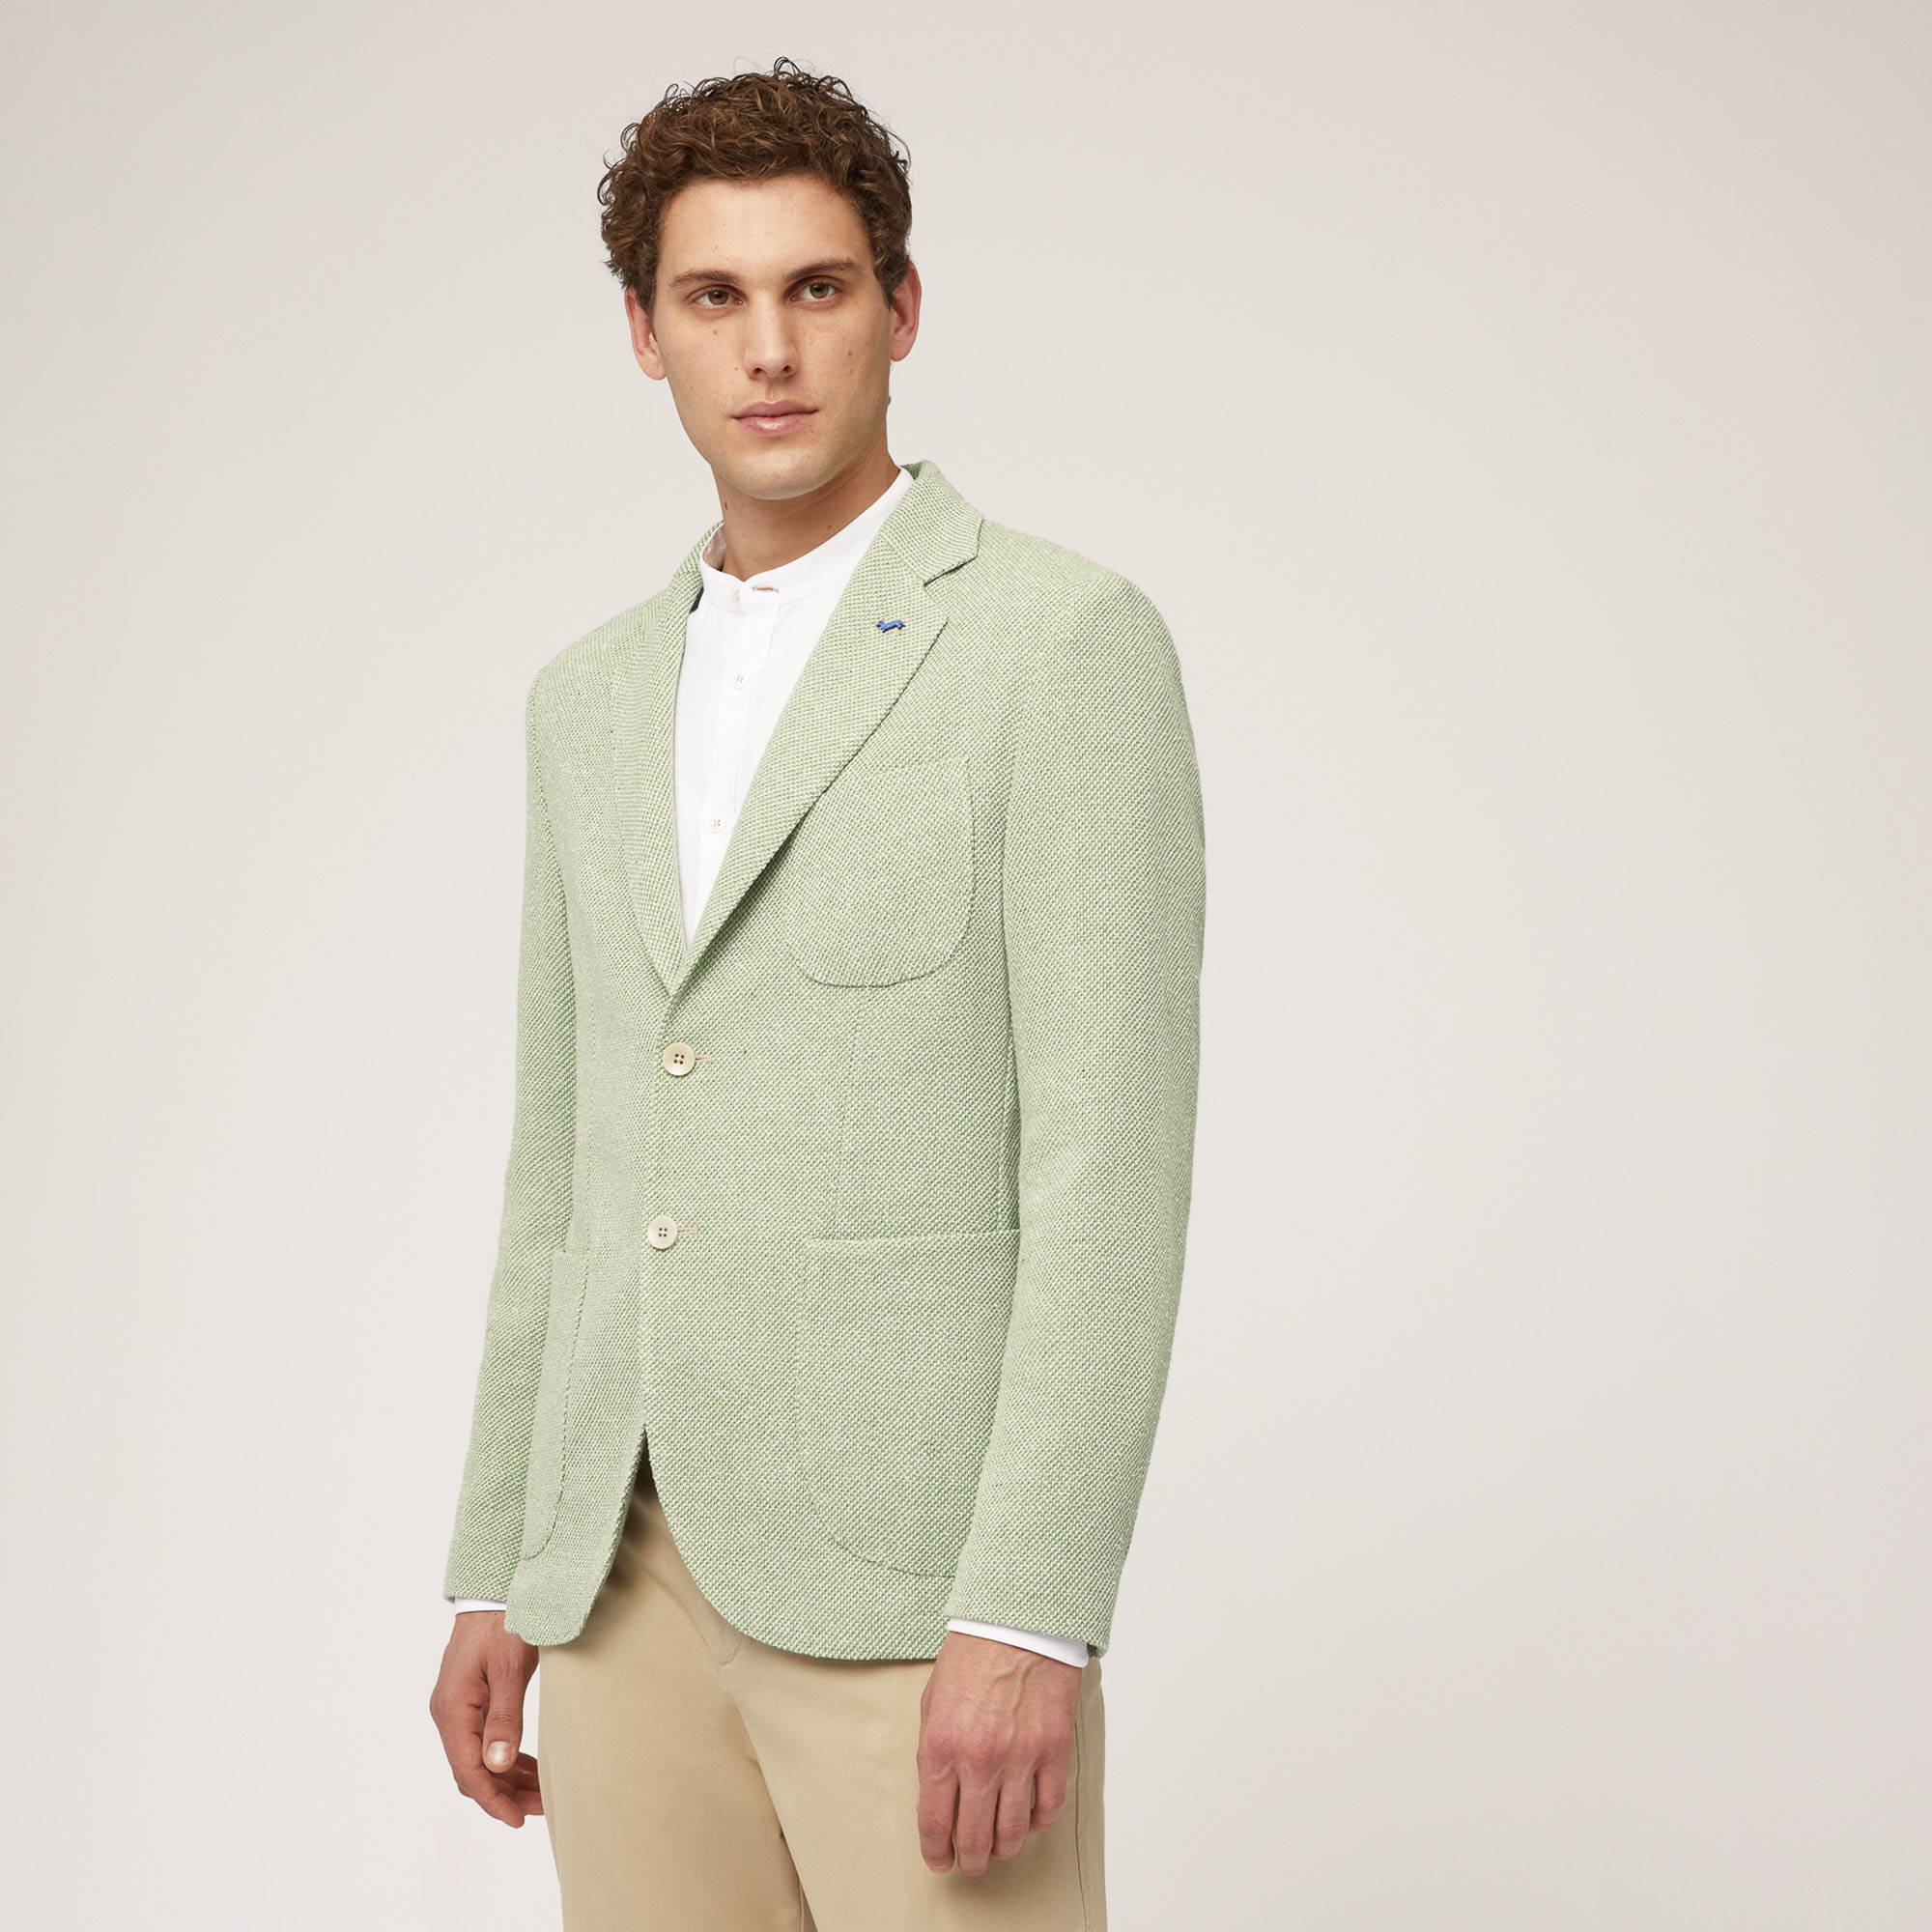 Cotton and Linen Jacket with Pockets and Breast Pocket, Herb, large image number 0